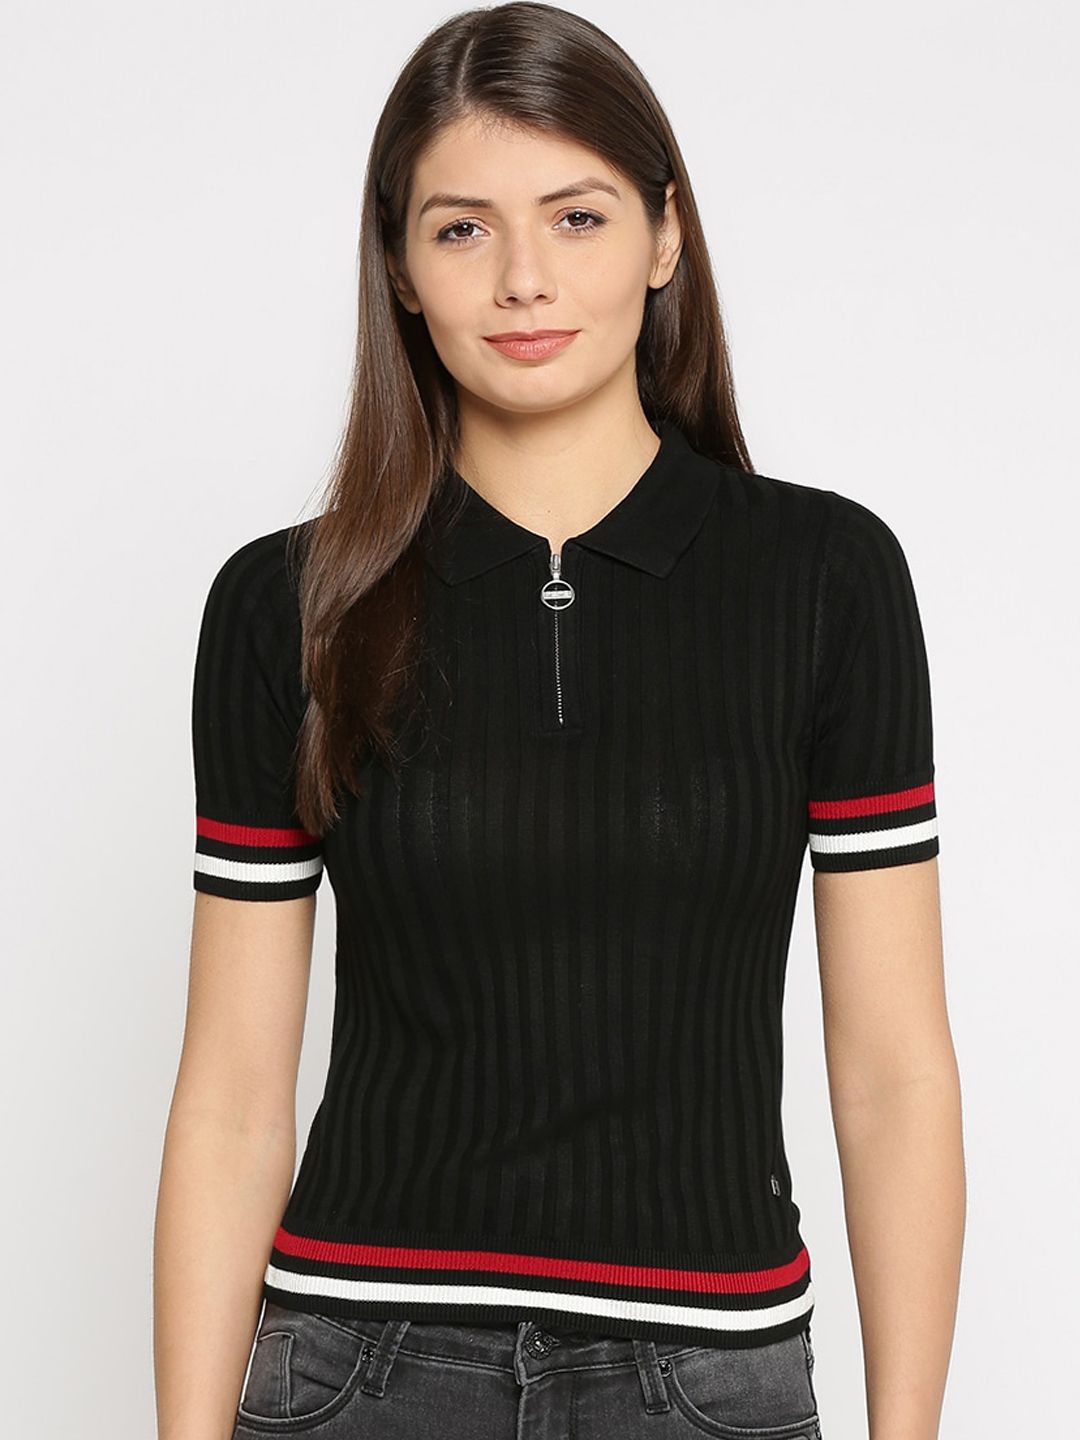 Pepe Jeans Women Black Striped Pullover Sweater Price in India